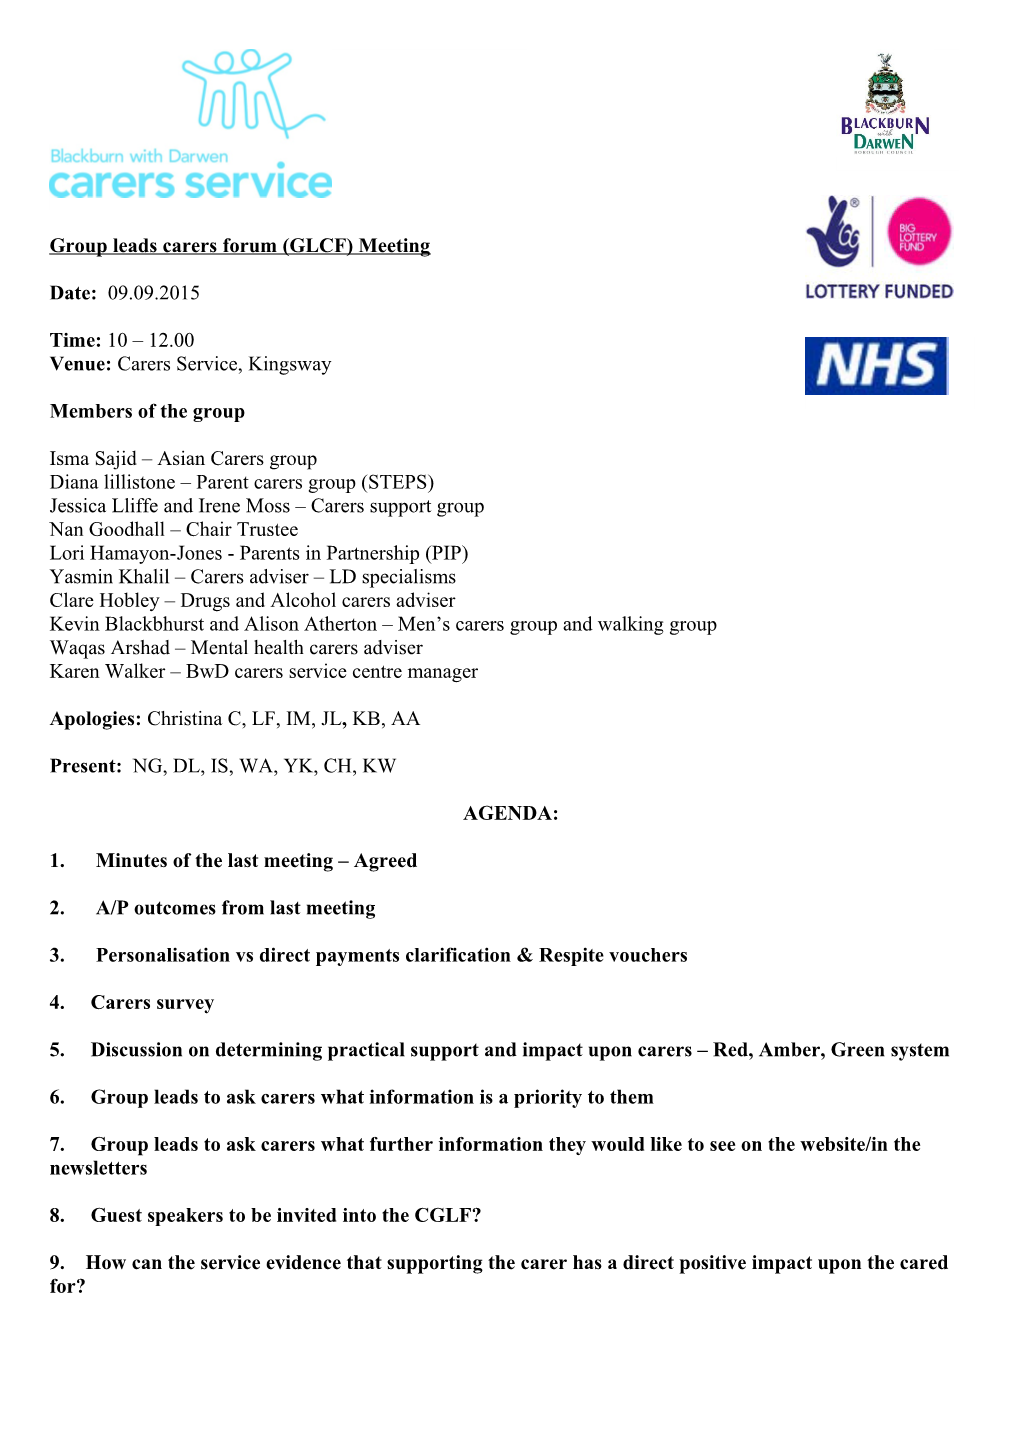 Group Leads Carers Forum (GLCF) Meeting